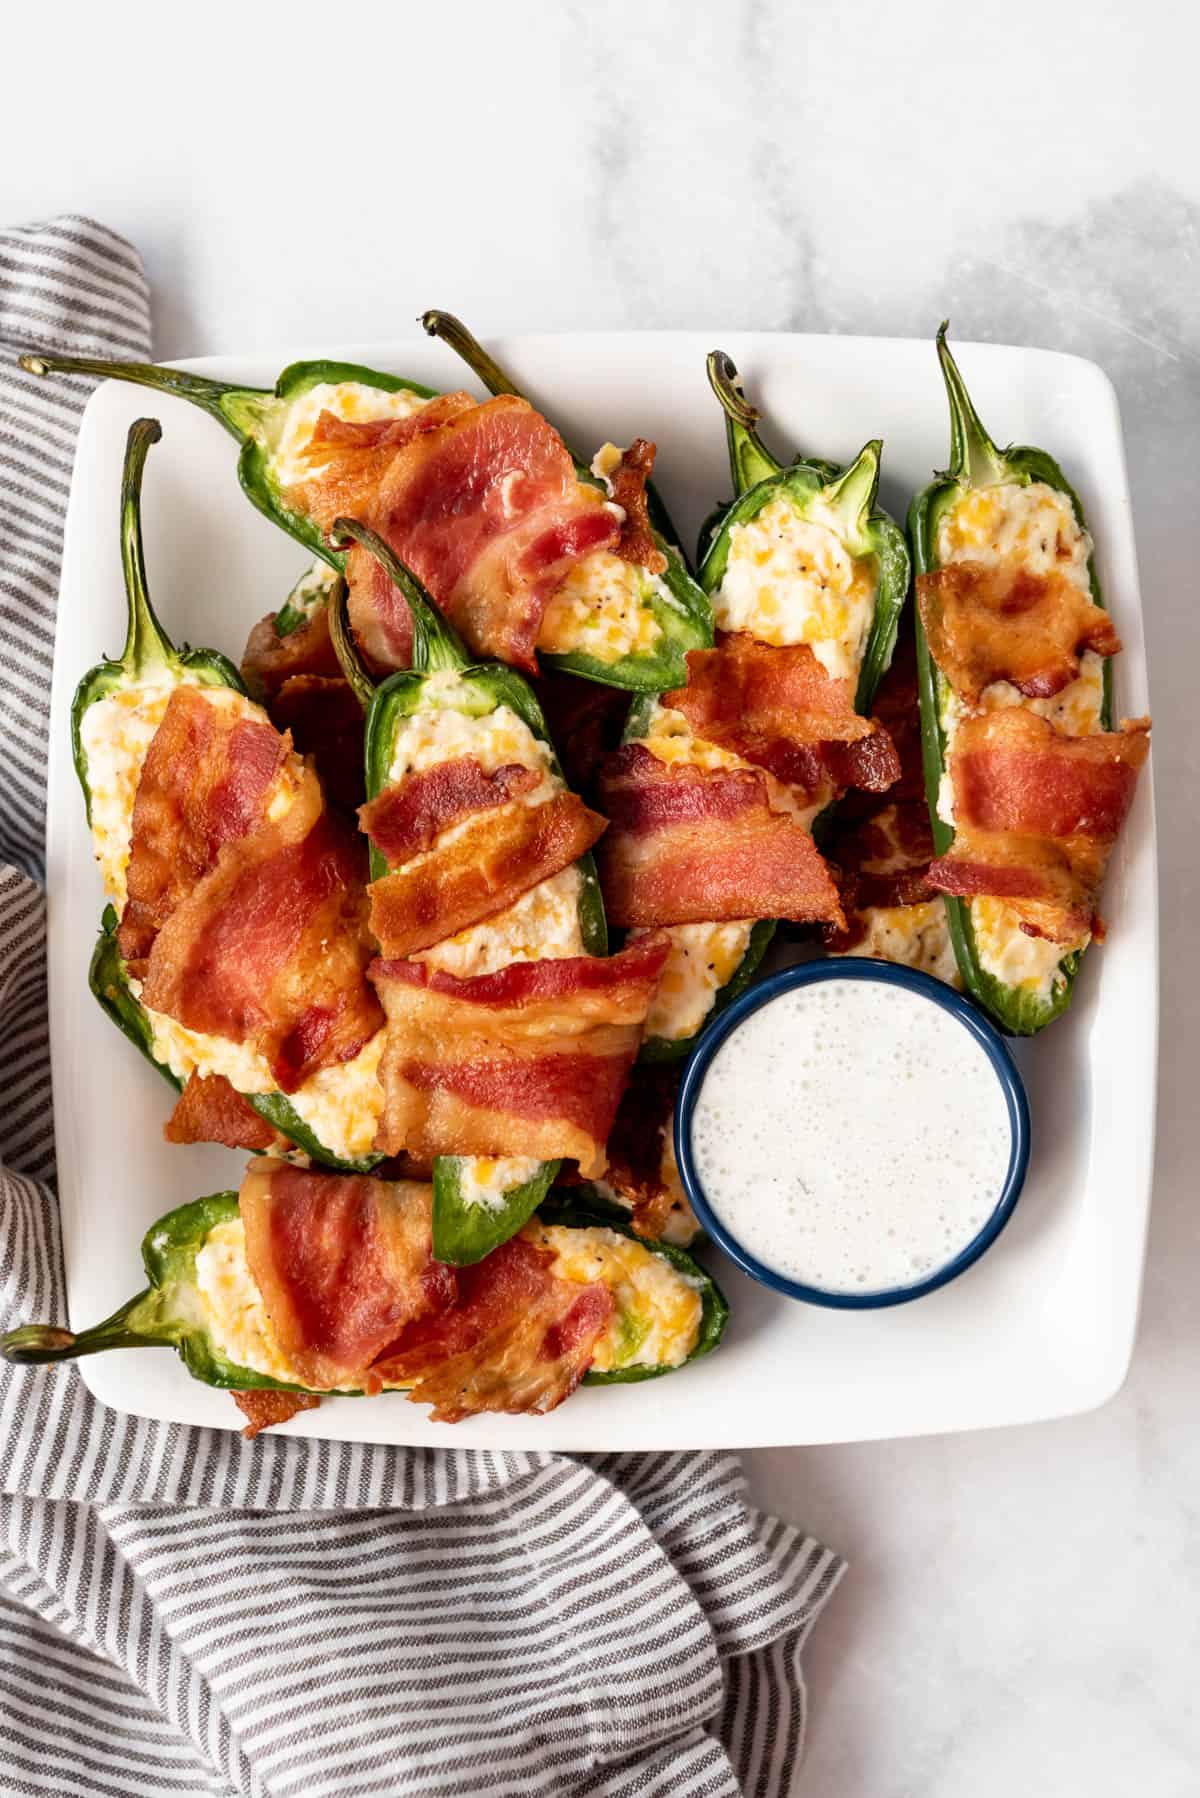 Jalapeno popper appetizers on a white plate.